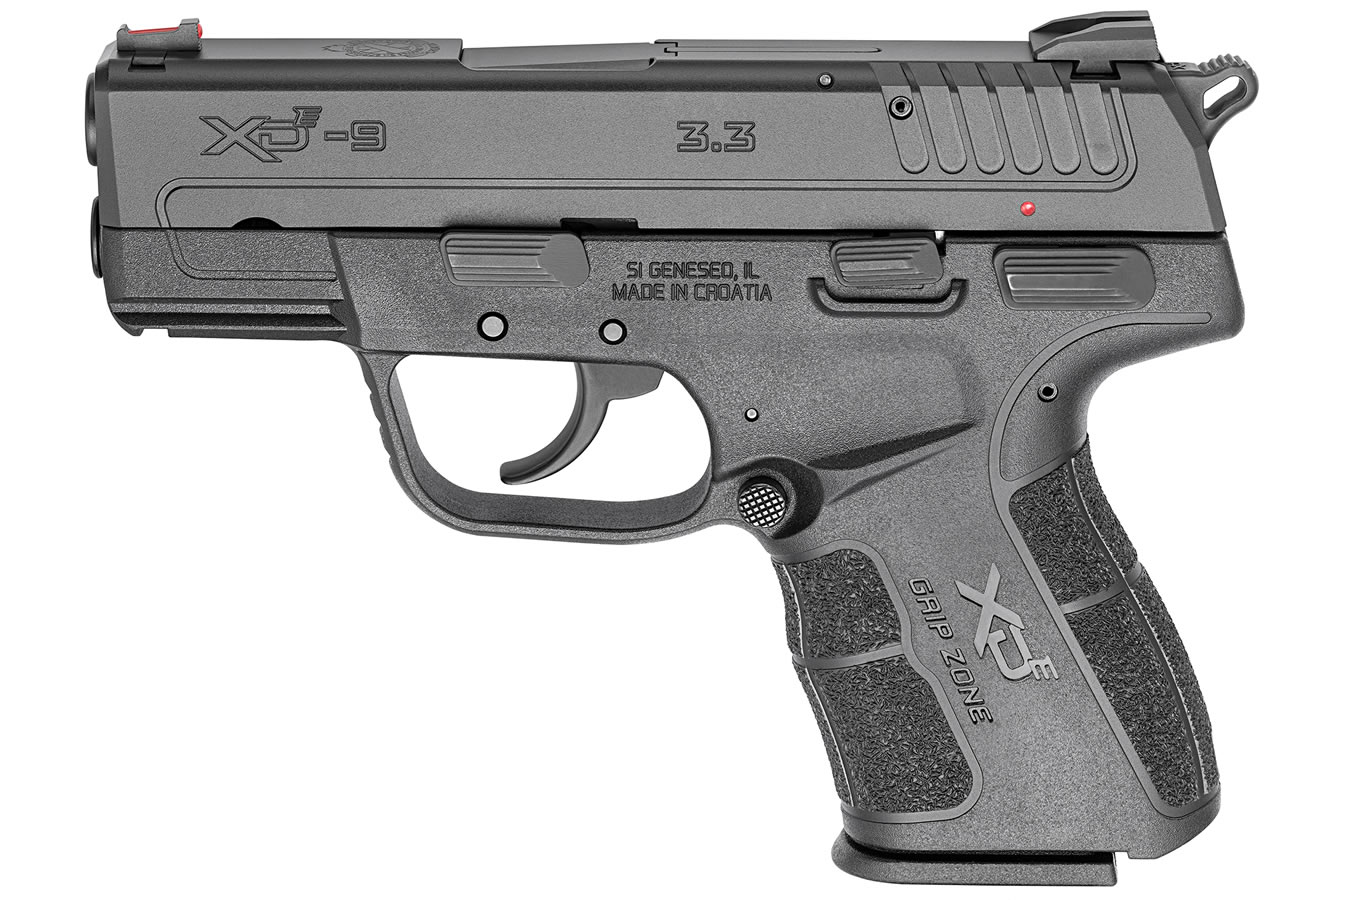 SPRINGFIELD XDE 9MM 3.3 INCH BLACK GEAR UP PACKAGE